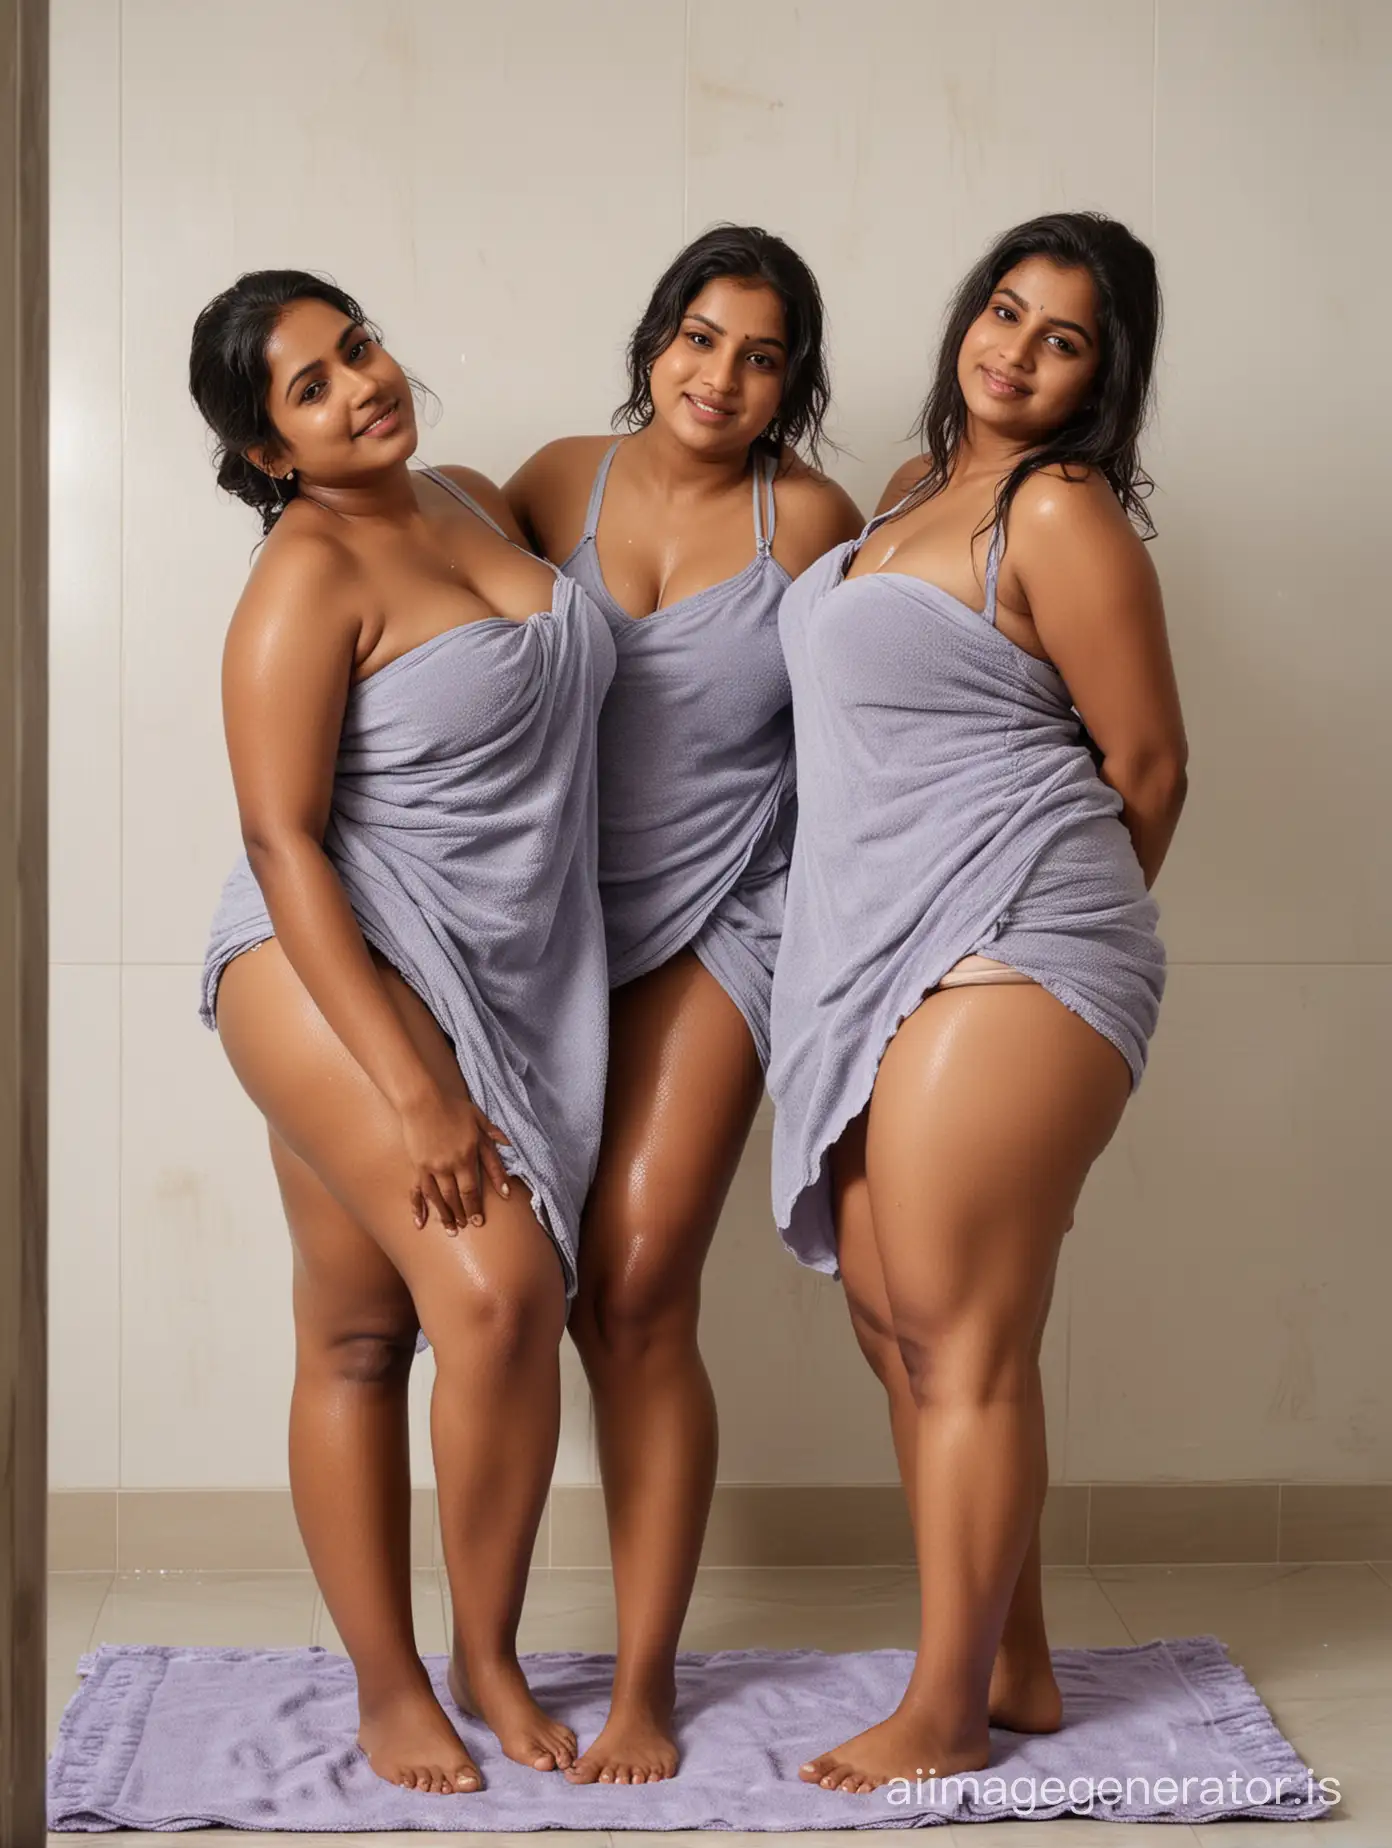 Indian-Plus-Size-Women-Posing-Intimately-on-Towel-in-Room